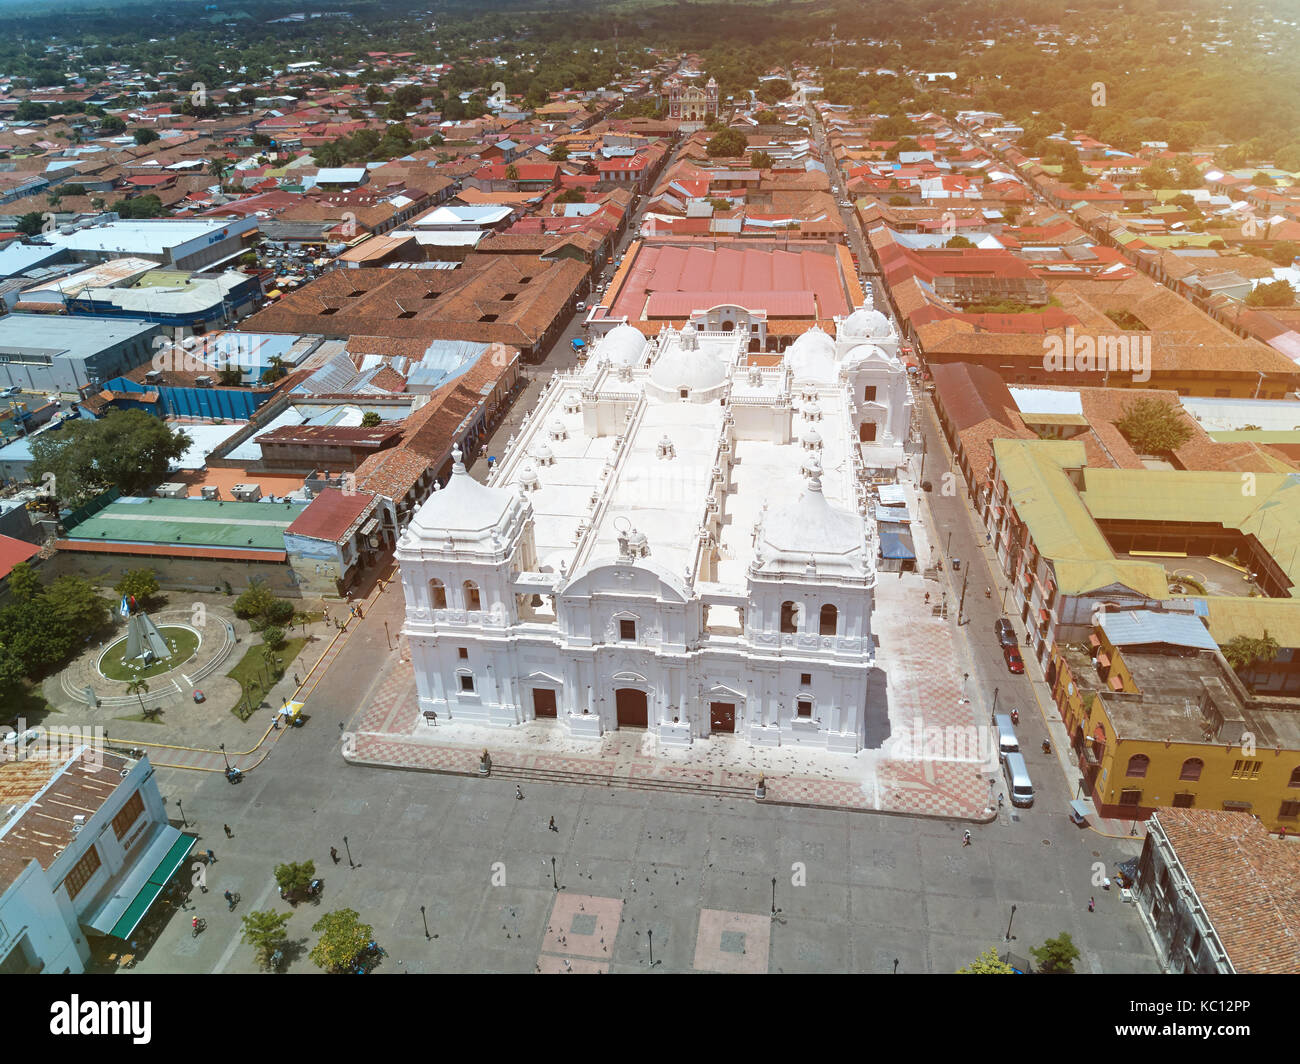 Leon city landscape in Nicaragua aerial view on sunny ray light Stock Photo